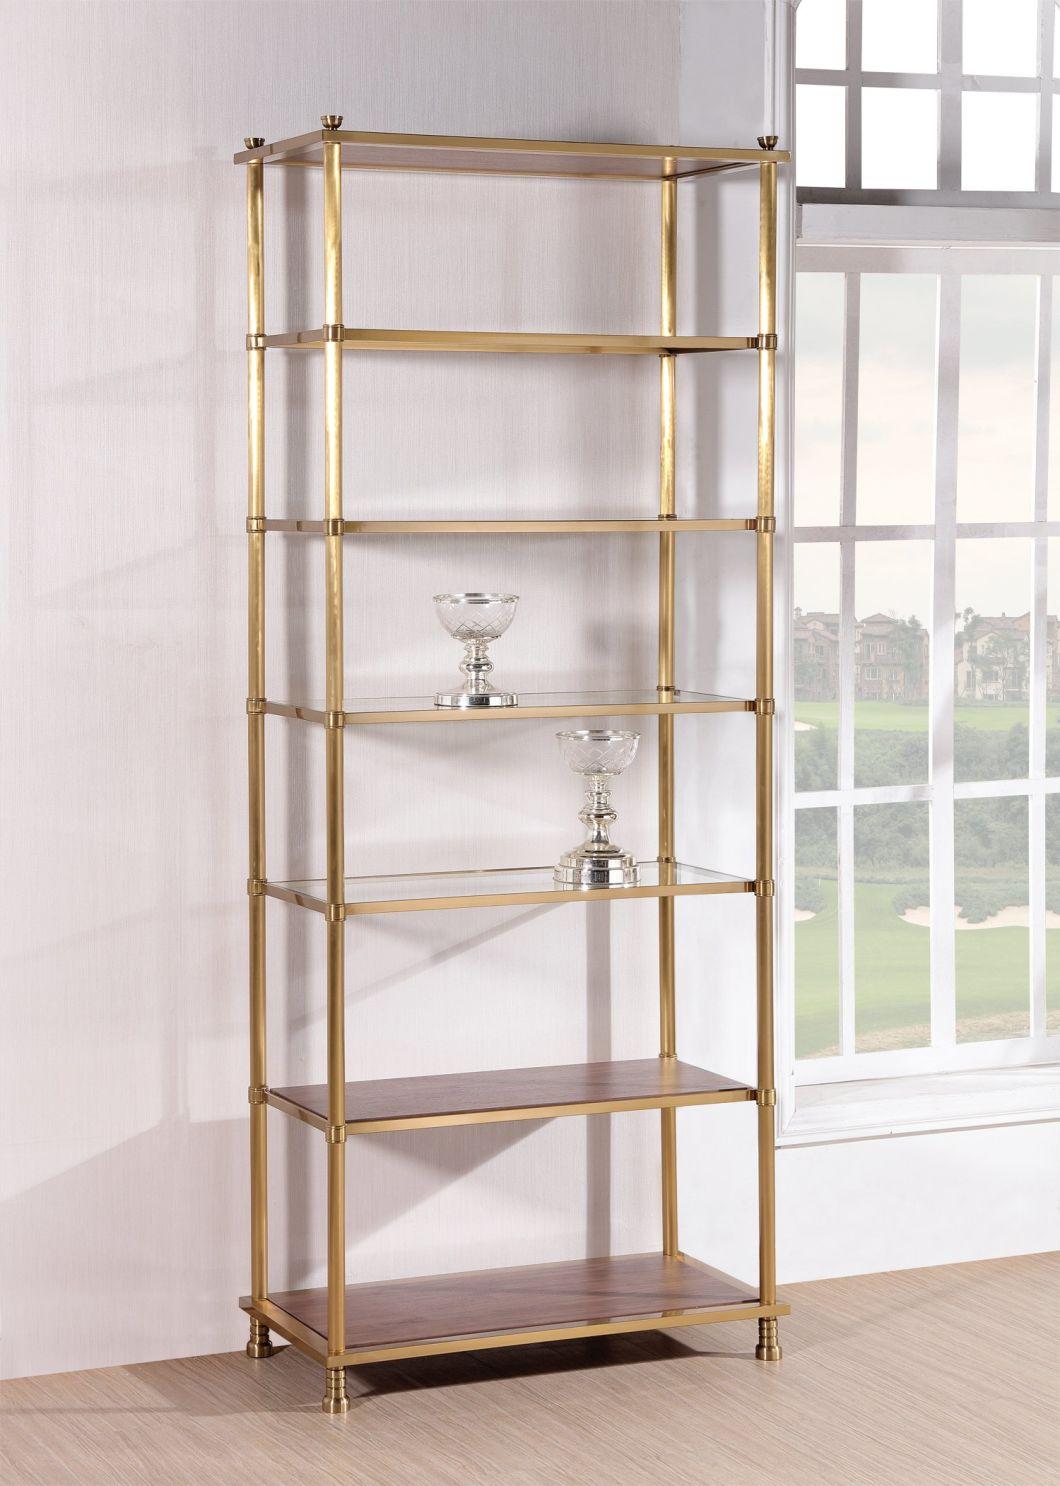 Factory Design Luxury Standard Size Bookshelf Gold with 5 Layers